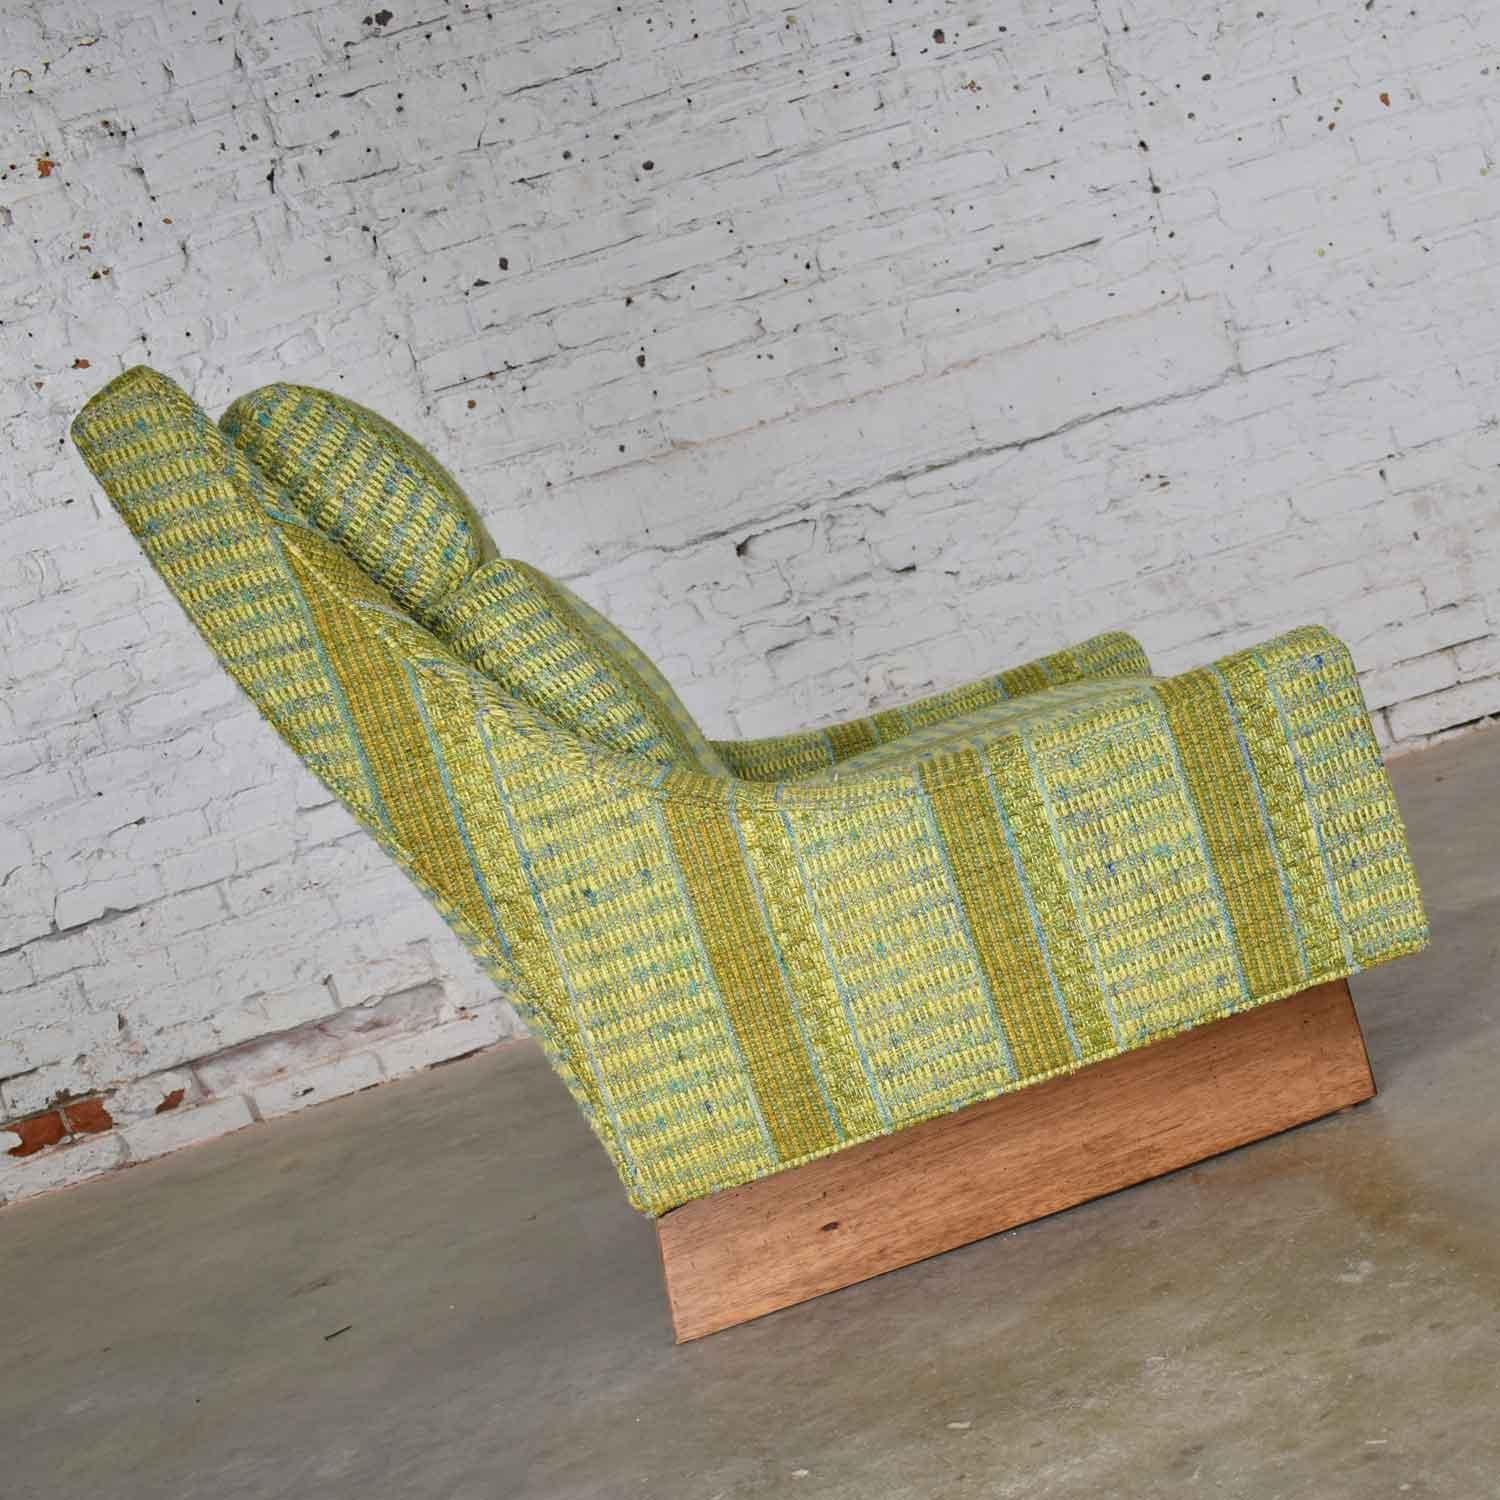 American Vintage Mid-Century Modern High Back Lounge Chair by Flair Division of Bernhardt